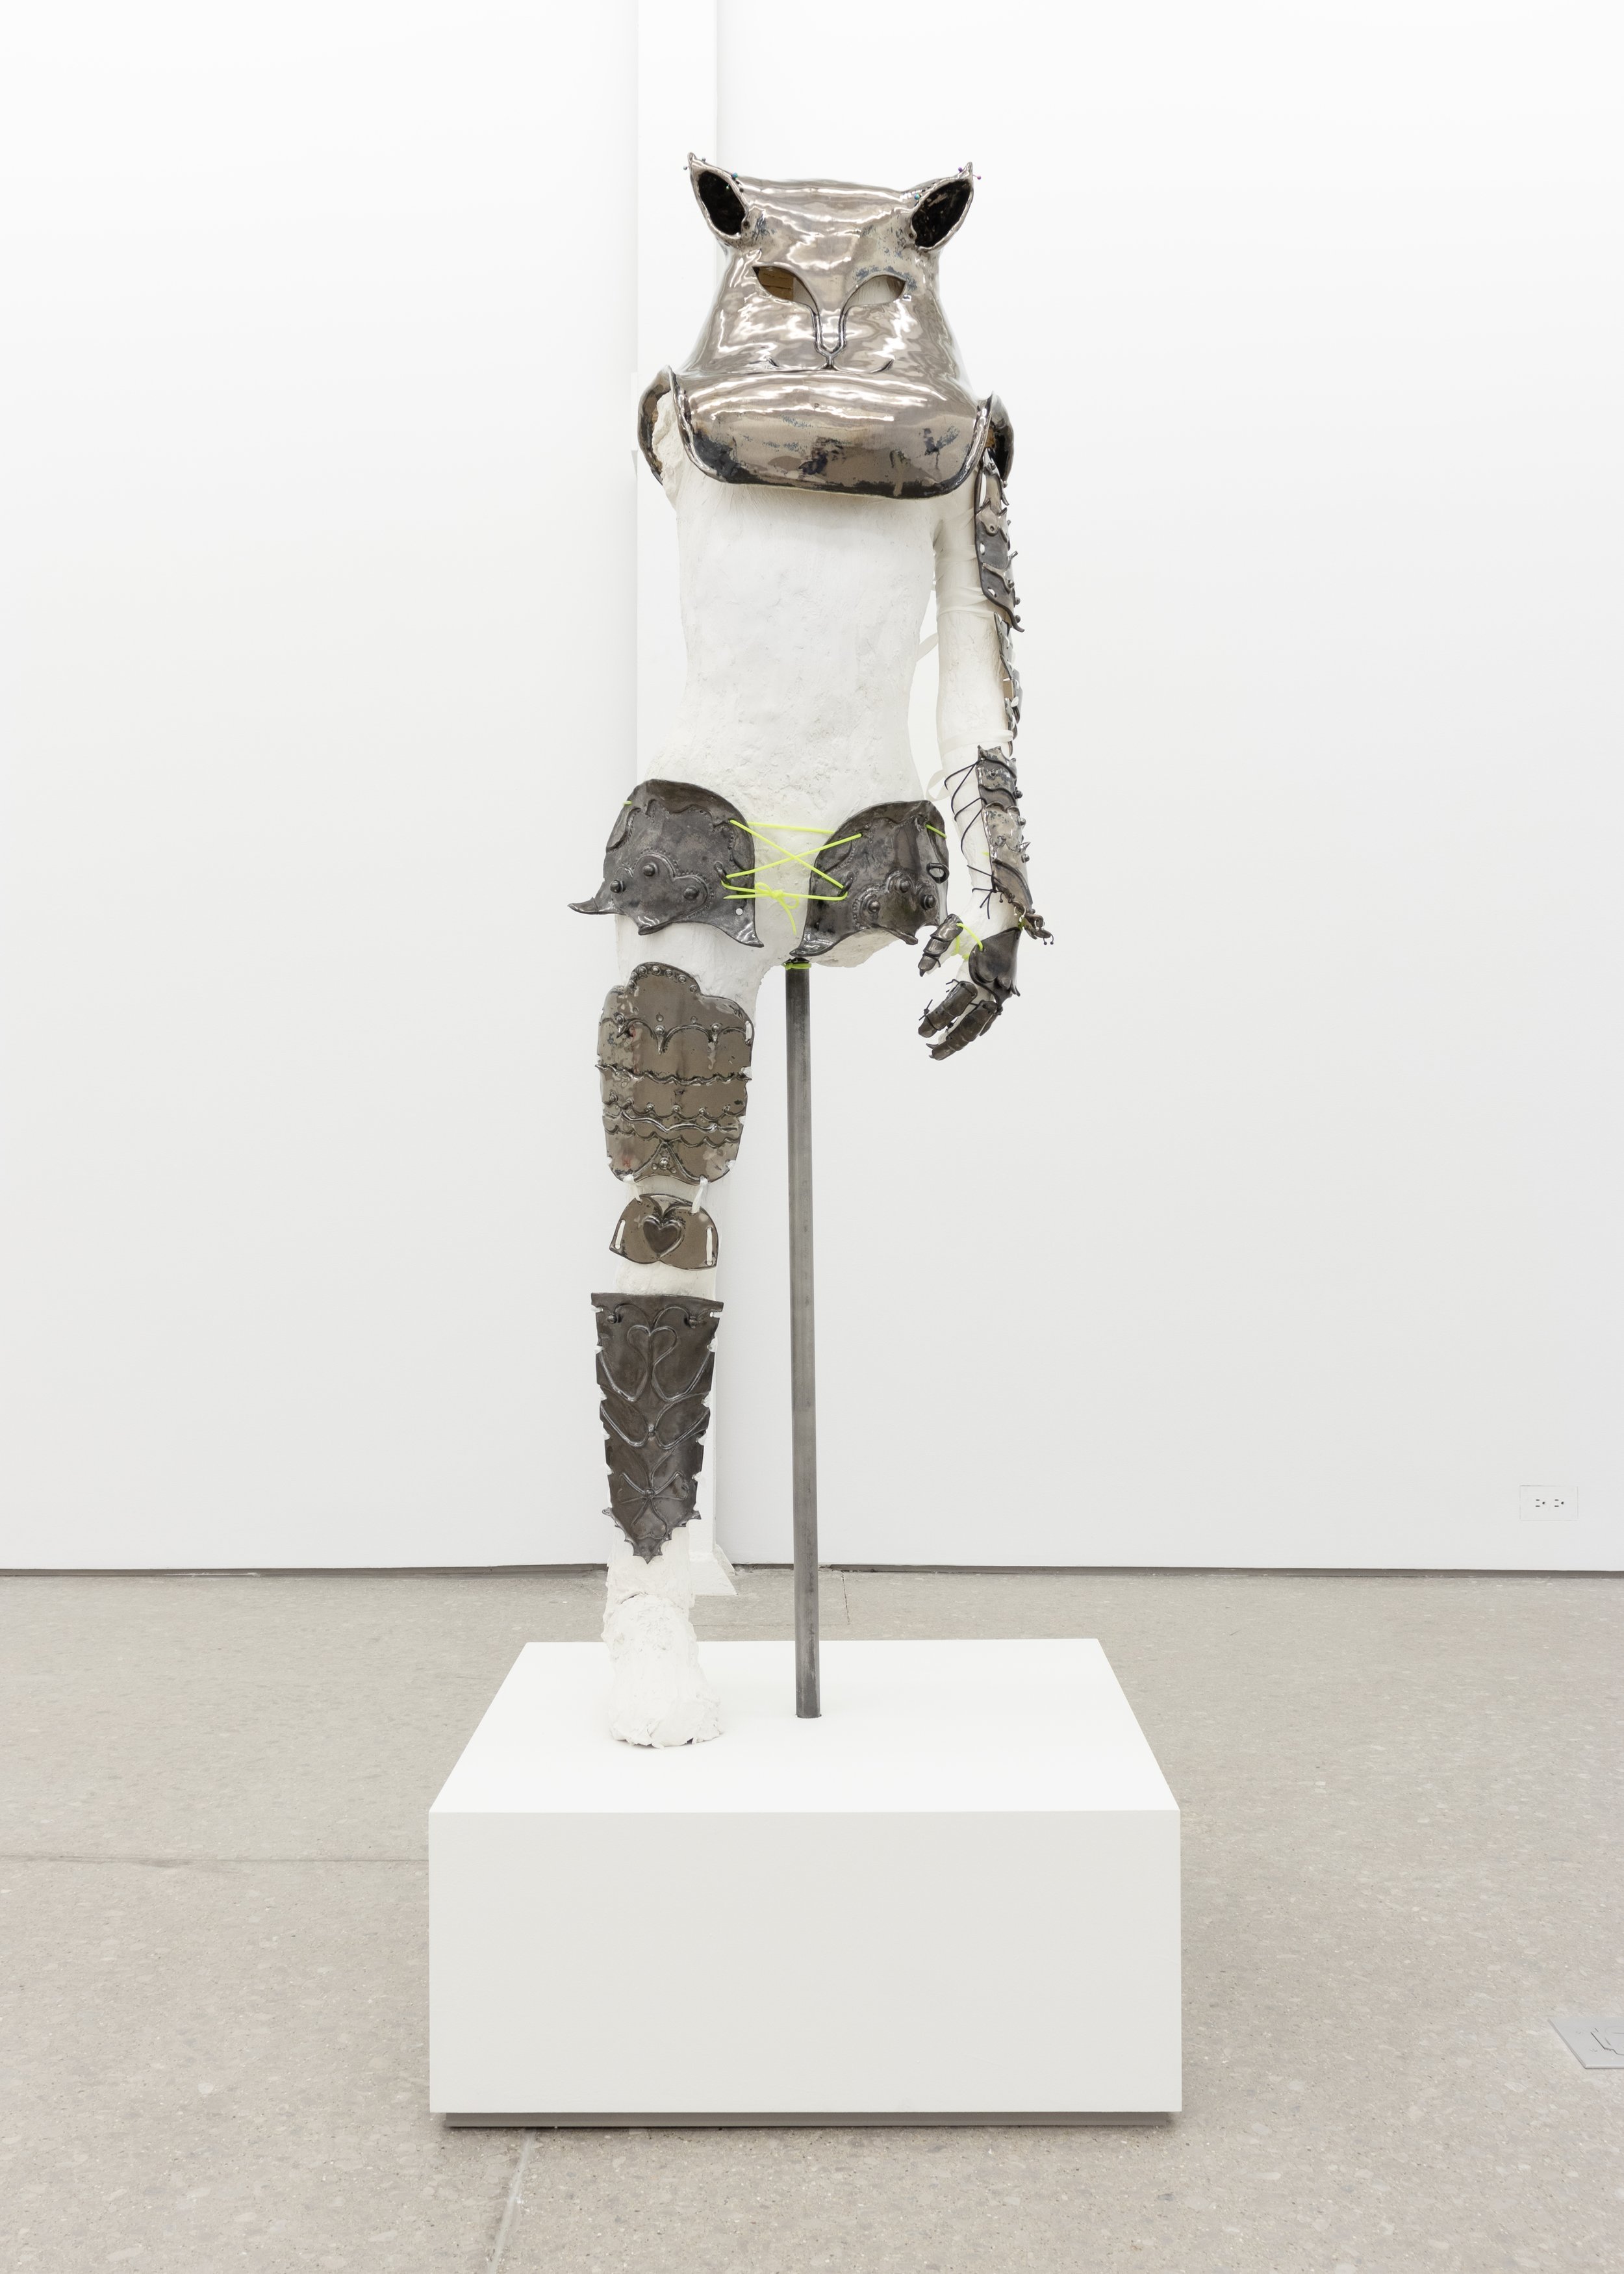  Chloe Seibert  Catsuit 4, 2023  glazed stoneware, plaster, wire, satin ribbon, rubber cord, stainless steel jewelry  68h x 19w x 16d in 